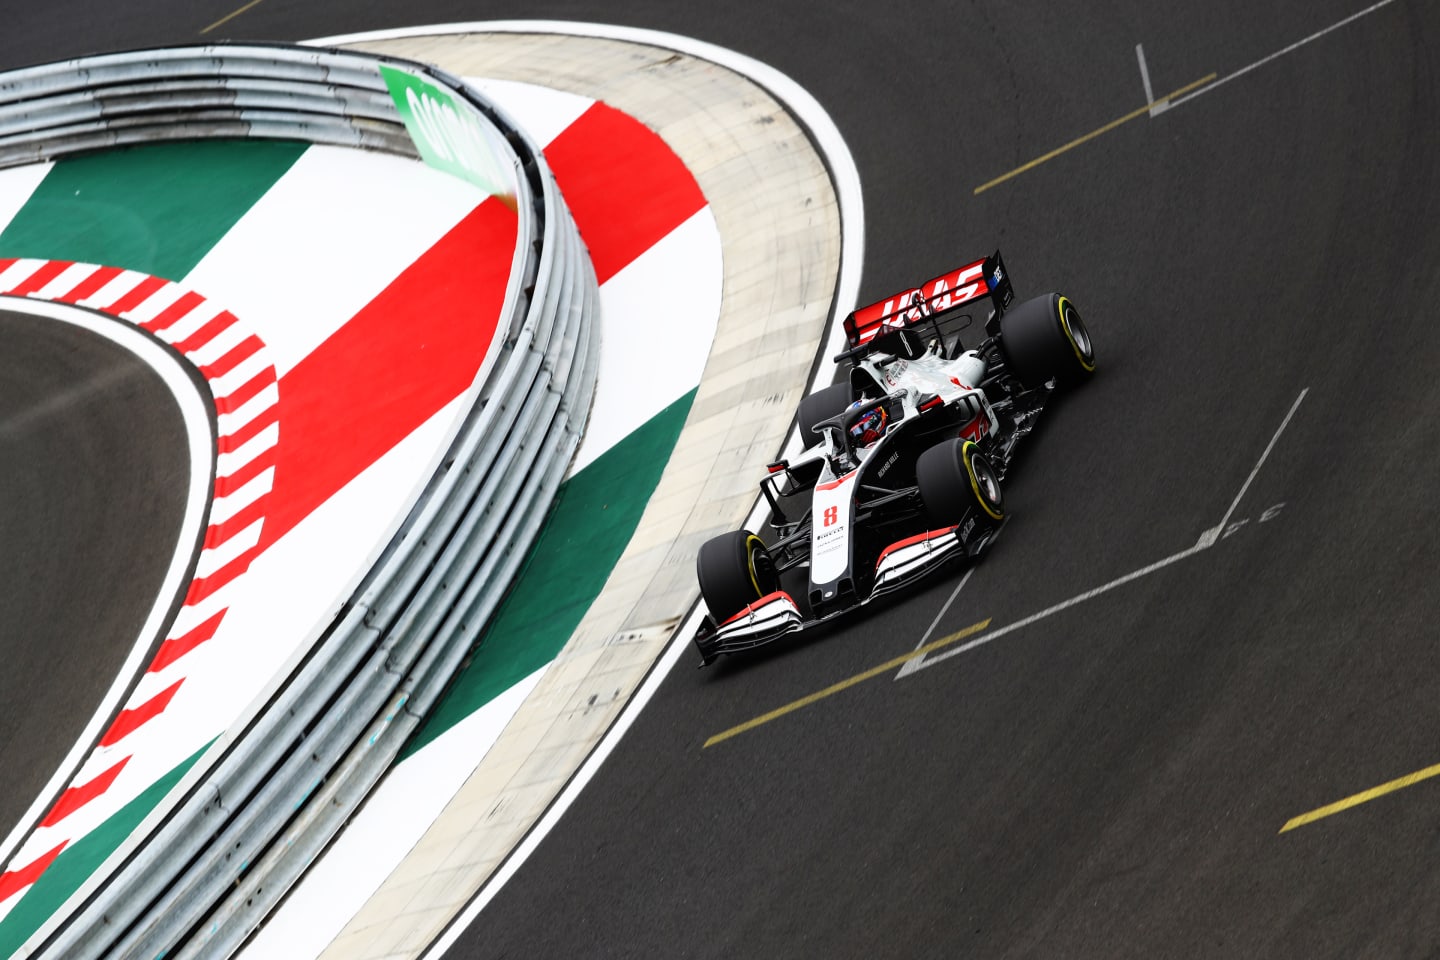 BUDAPEST, HUNGARY - JULY 17: Romain Grosjean of France driving the (8) Haas F1 Team VF-20 Ferrari on track during practice for the F1 Grand Prix of Hungary at Hungaroring on July 17, 2020 in Budapest, Hungary. (Photo by Mark Thompson/Getty Images,)